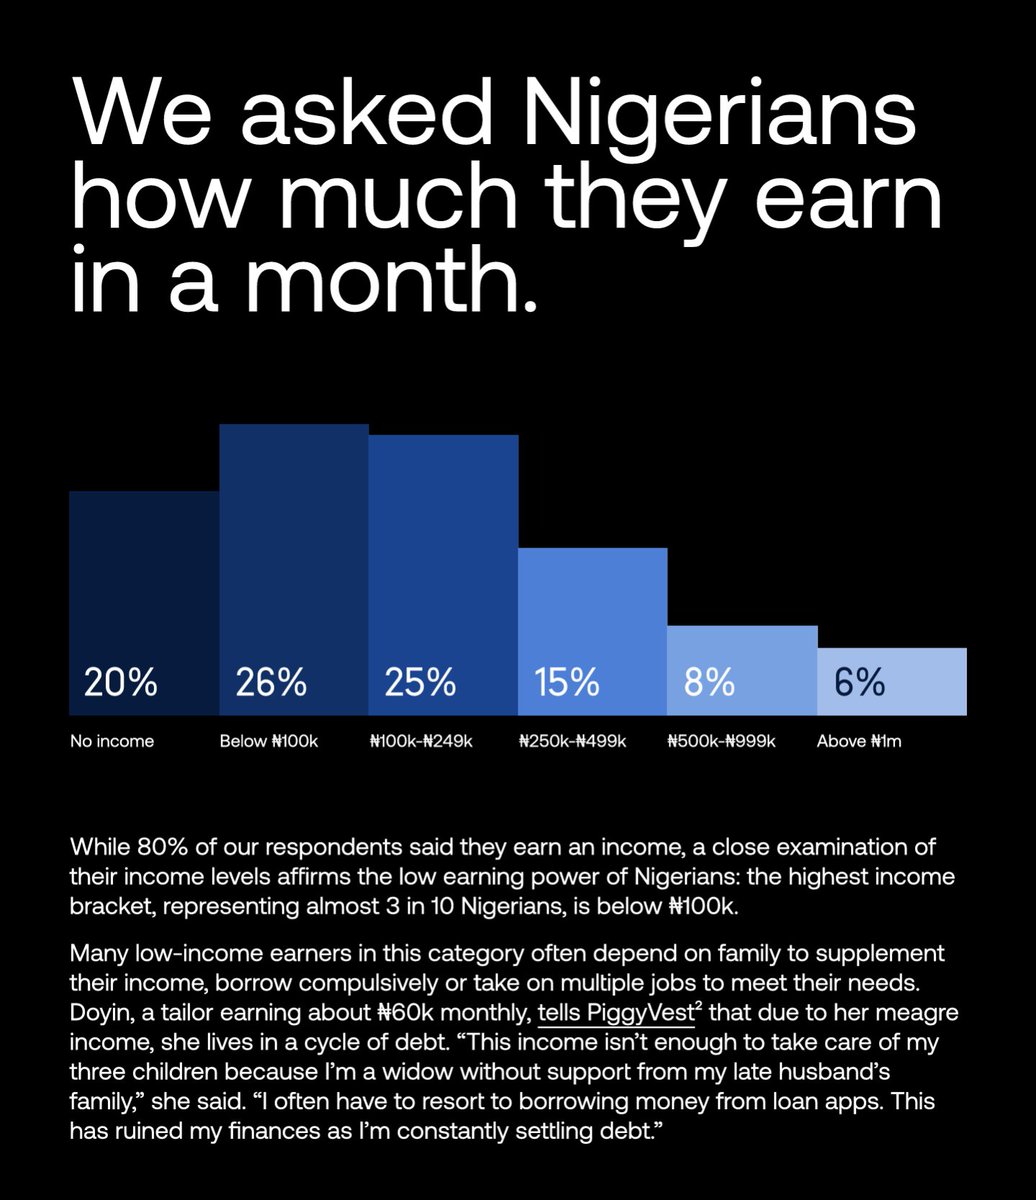 Piggyvest data showed that most 🇳🇬 residents earn less than a quarter of a million naira monthly